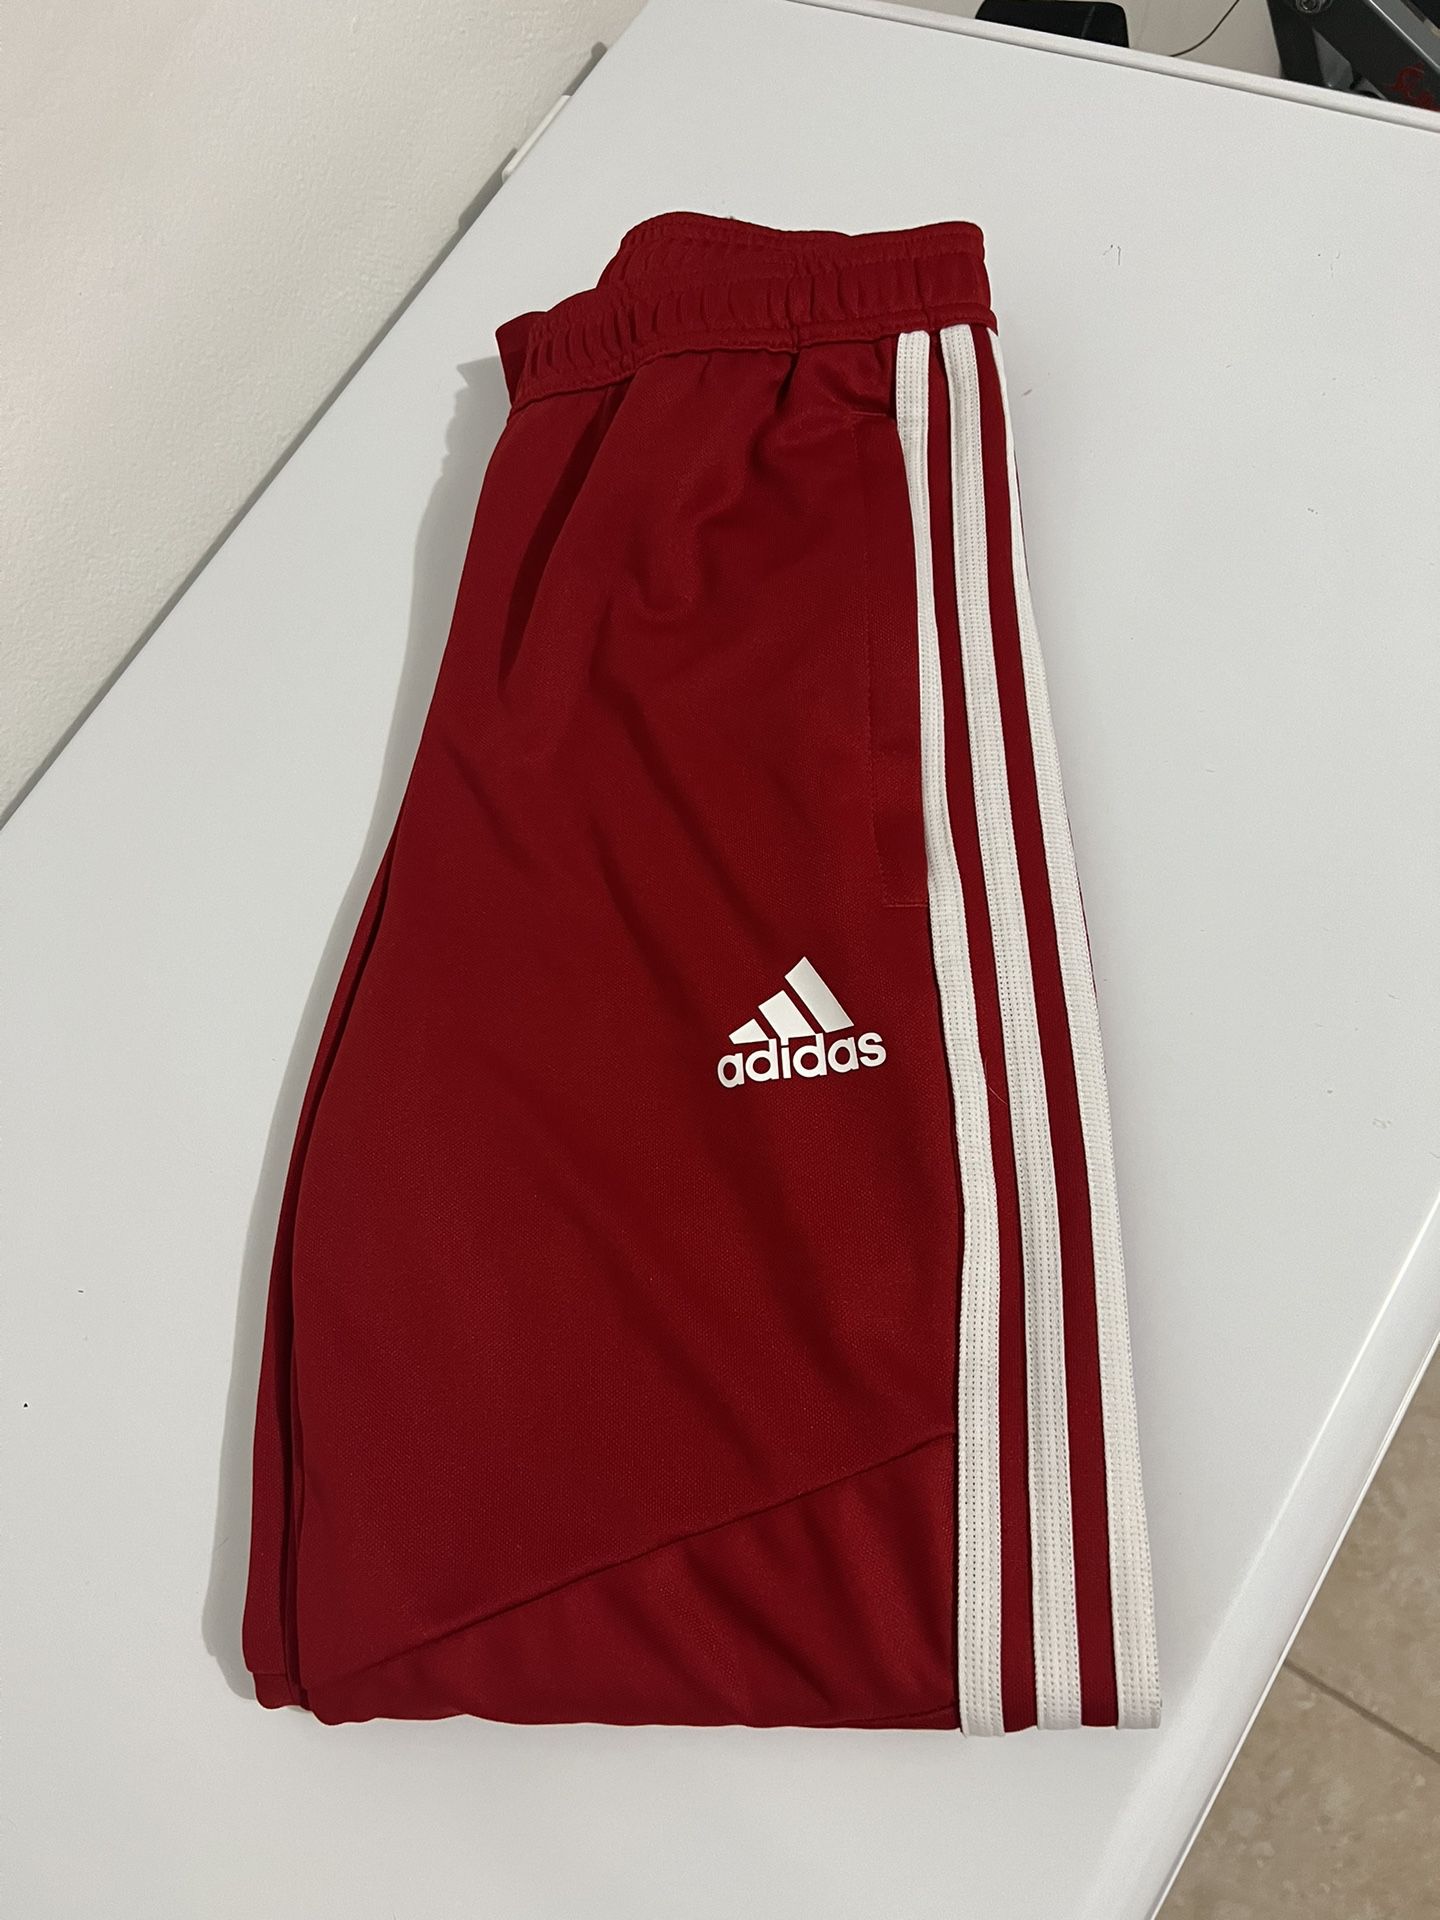 Small Size Adida Pants In Excellent Condition Like Brand New $25 